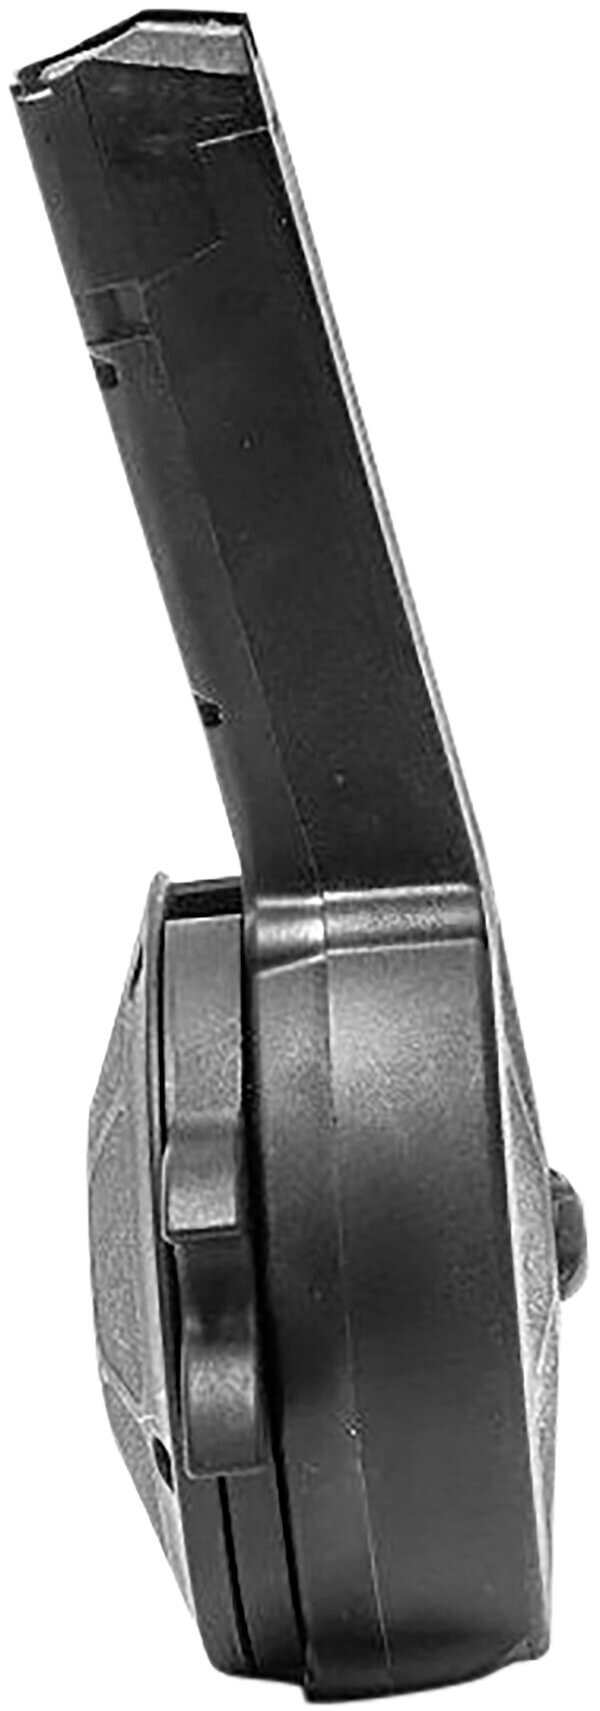 Kci Usa Inc KCIMZ027 Glock 50rd Drum 9mm Luger Black Polymer Fits Double Stack Glock